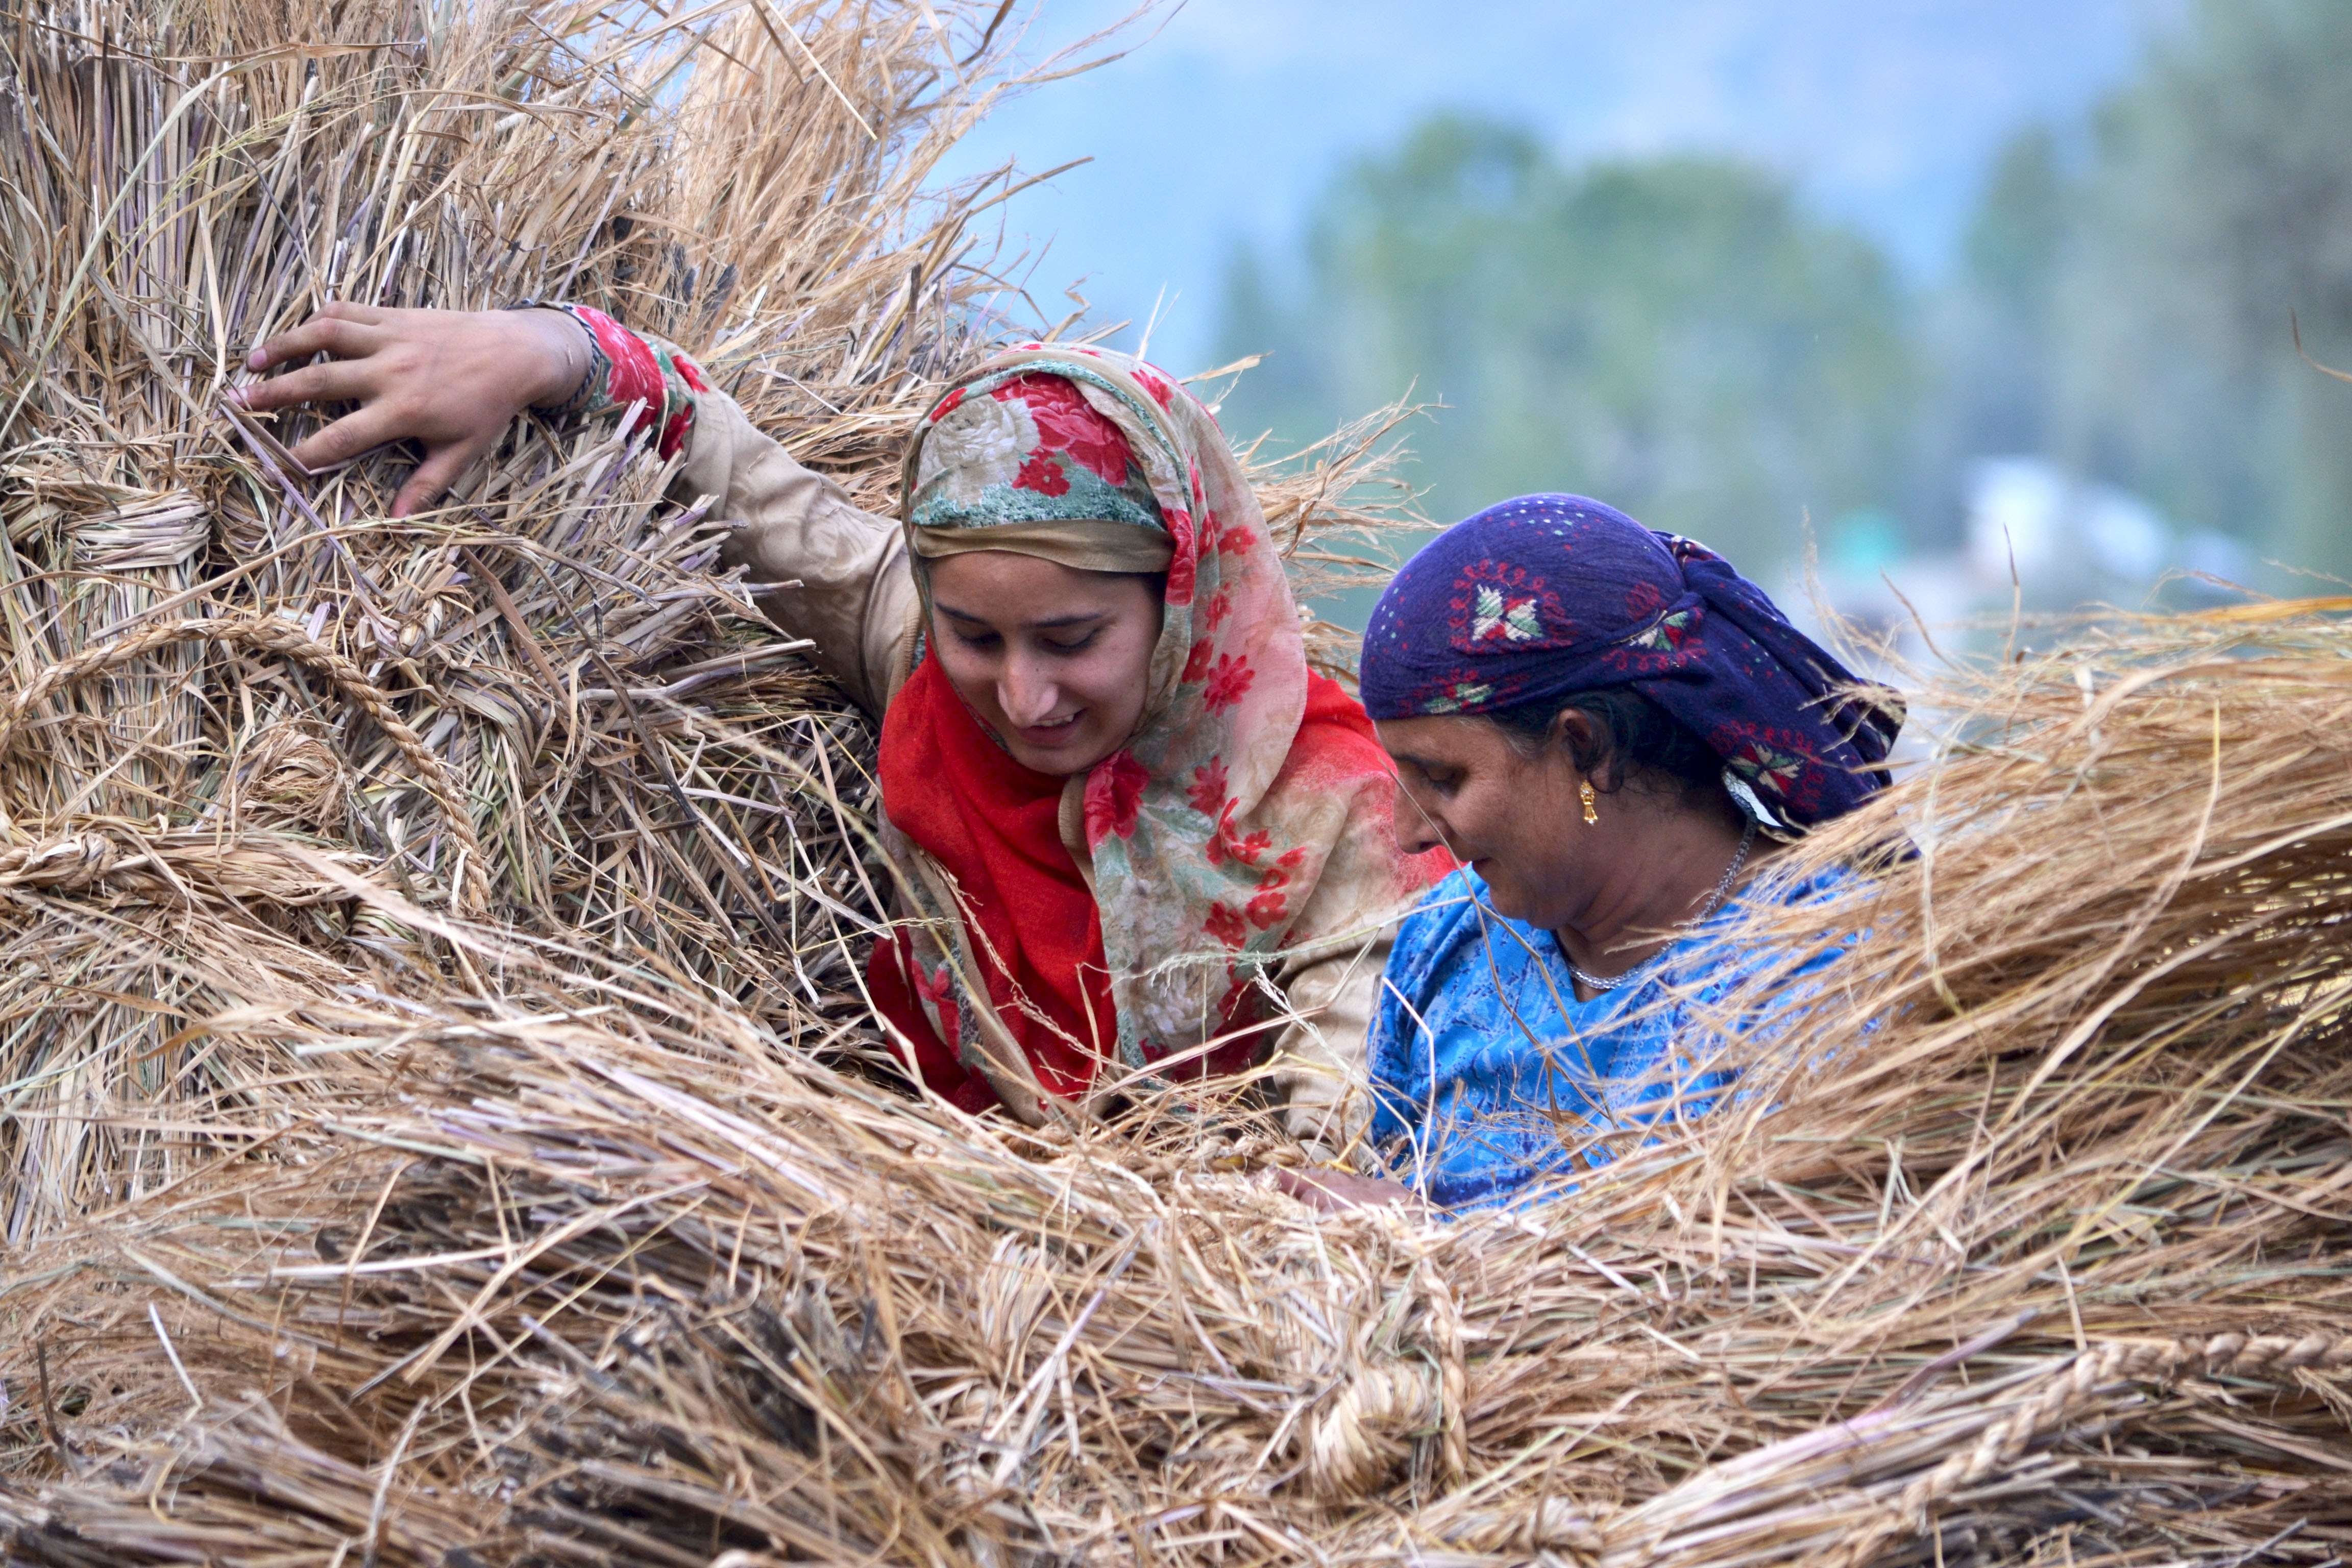 Kashmiri women farmers carry lumps of grass during harvesting of rice, in the outskirts of Srinagar, the summer capital of Indian administered Kashmir.